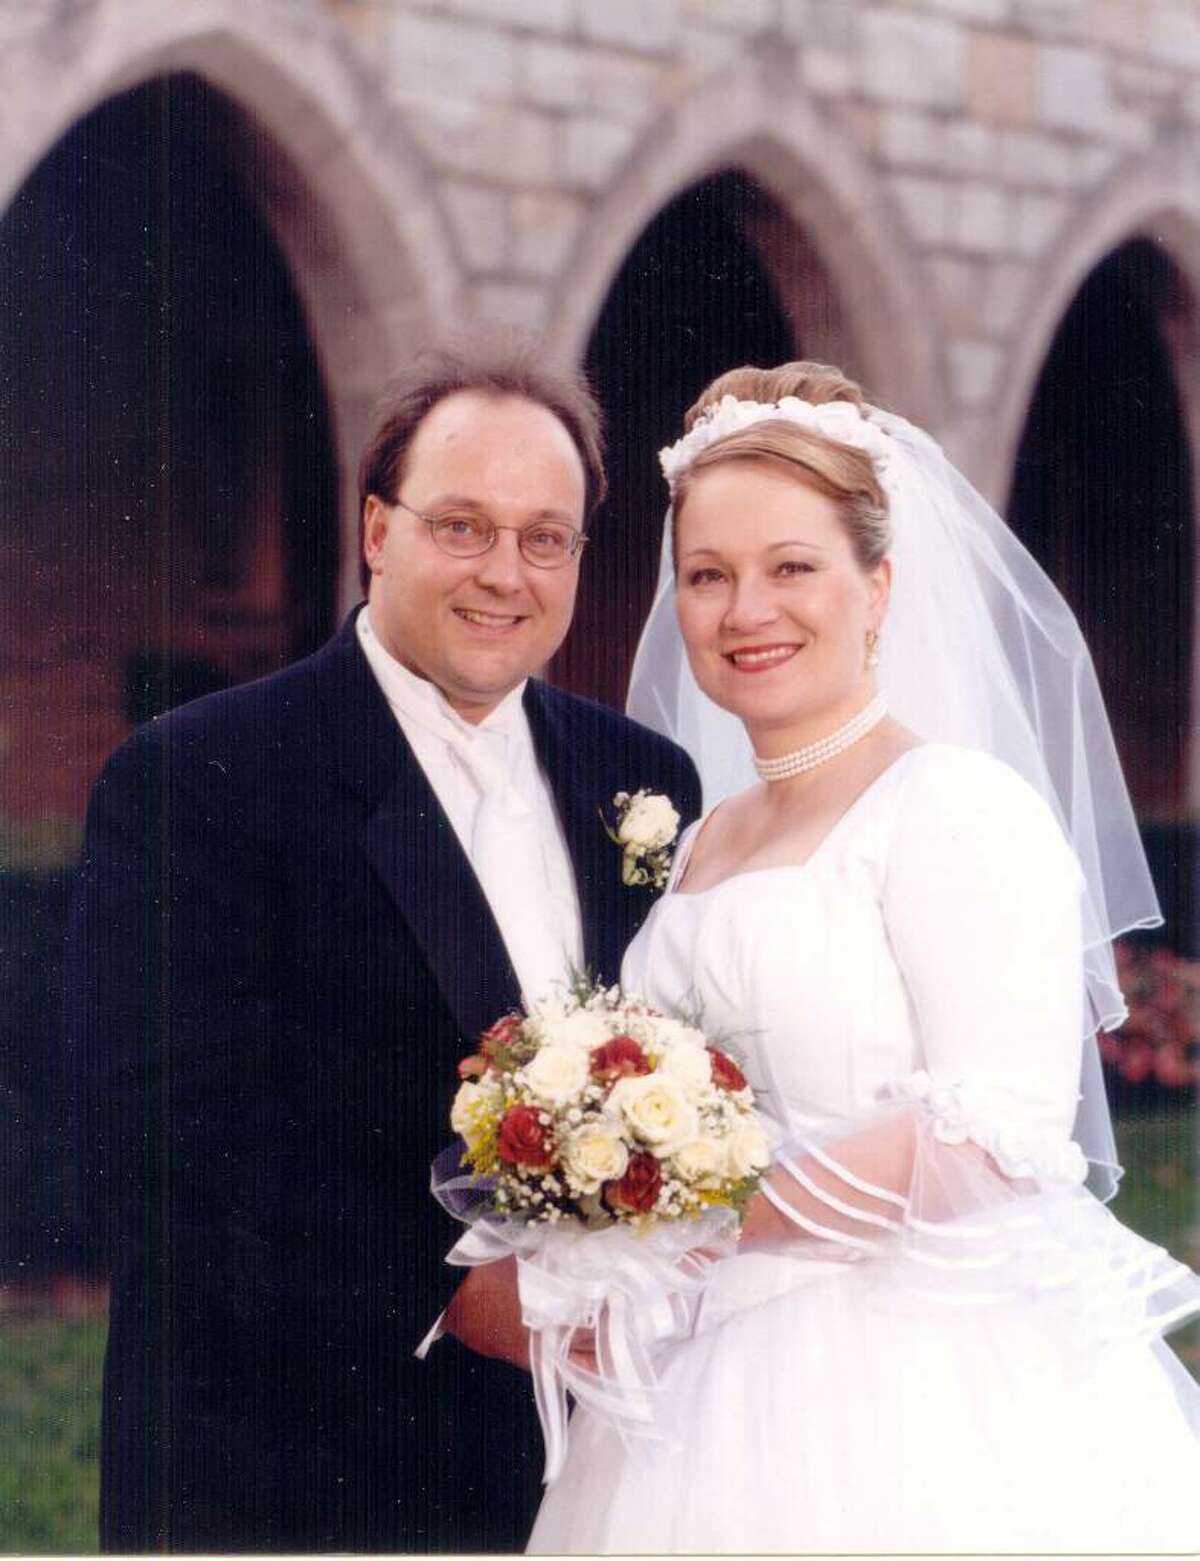 Bruce Weed and Jeannine Berkowitz were married Oct. 14, 2000, at St. Mary's Church in Stamford.